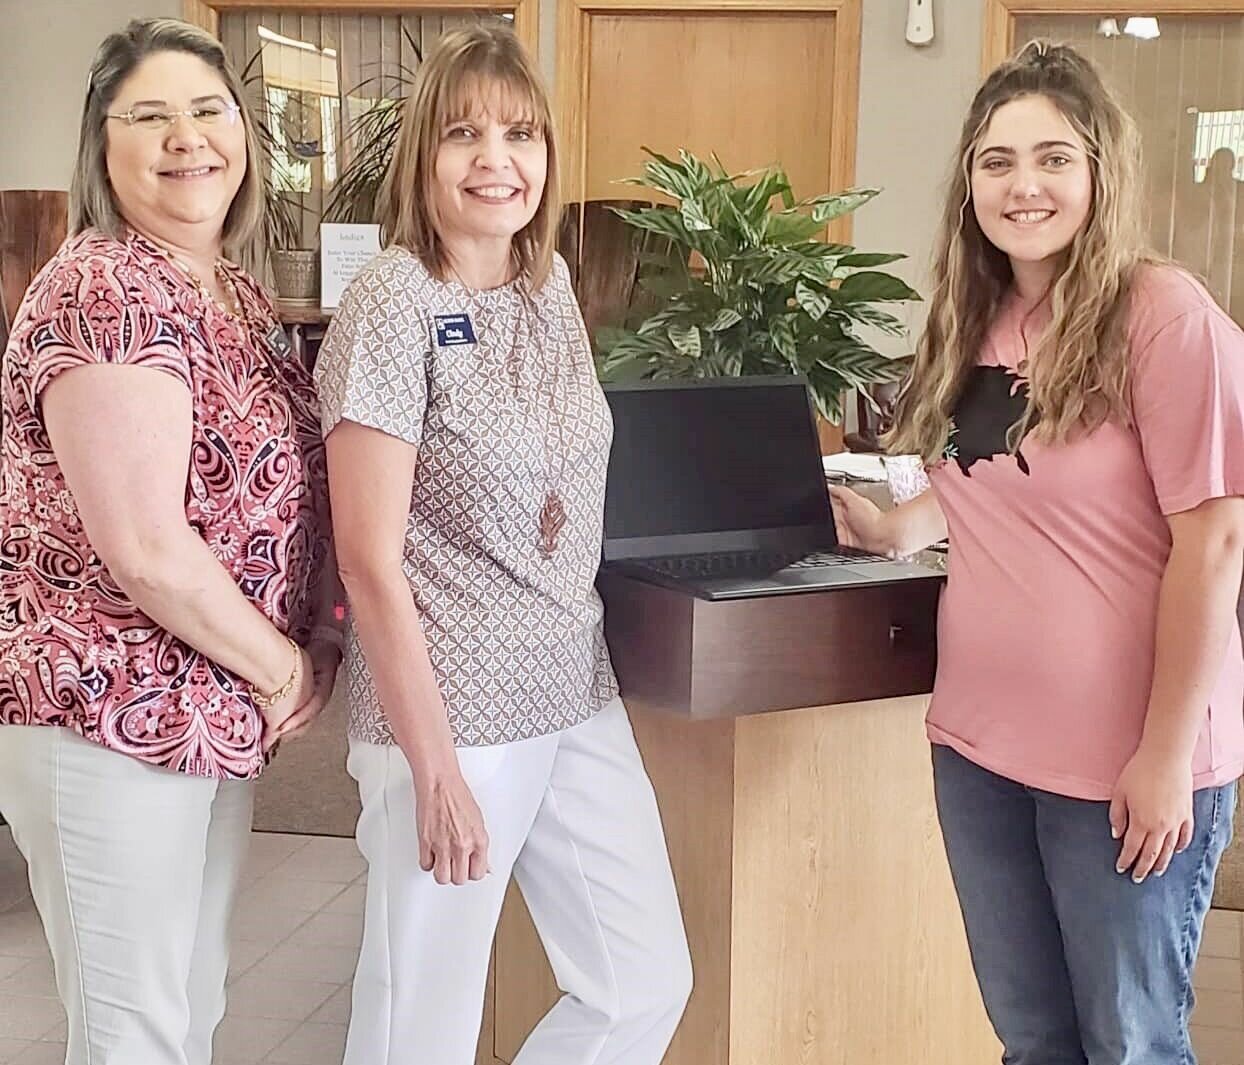 The Bank of Birch Tree branch of Alton Bank recently gave away four Chromebooks to students from each of the schools in Mtn. View-Birch Tree School District. From Liberty High School, Piper Nichols, right, was the lucky winner. With her are Bank of Birch Tree employees Kim Ridge, left, and Cindy Bradford.